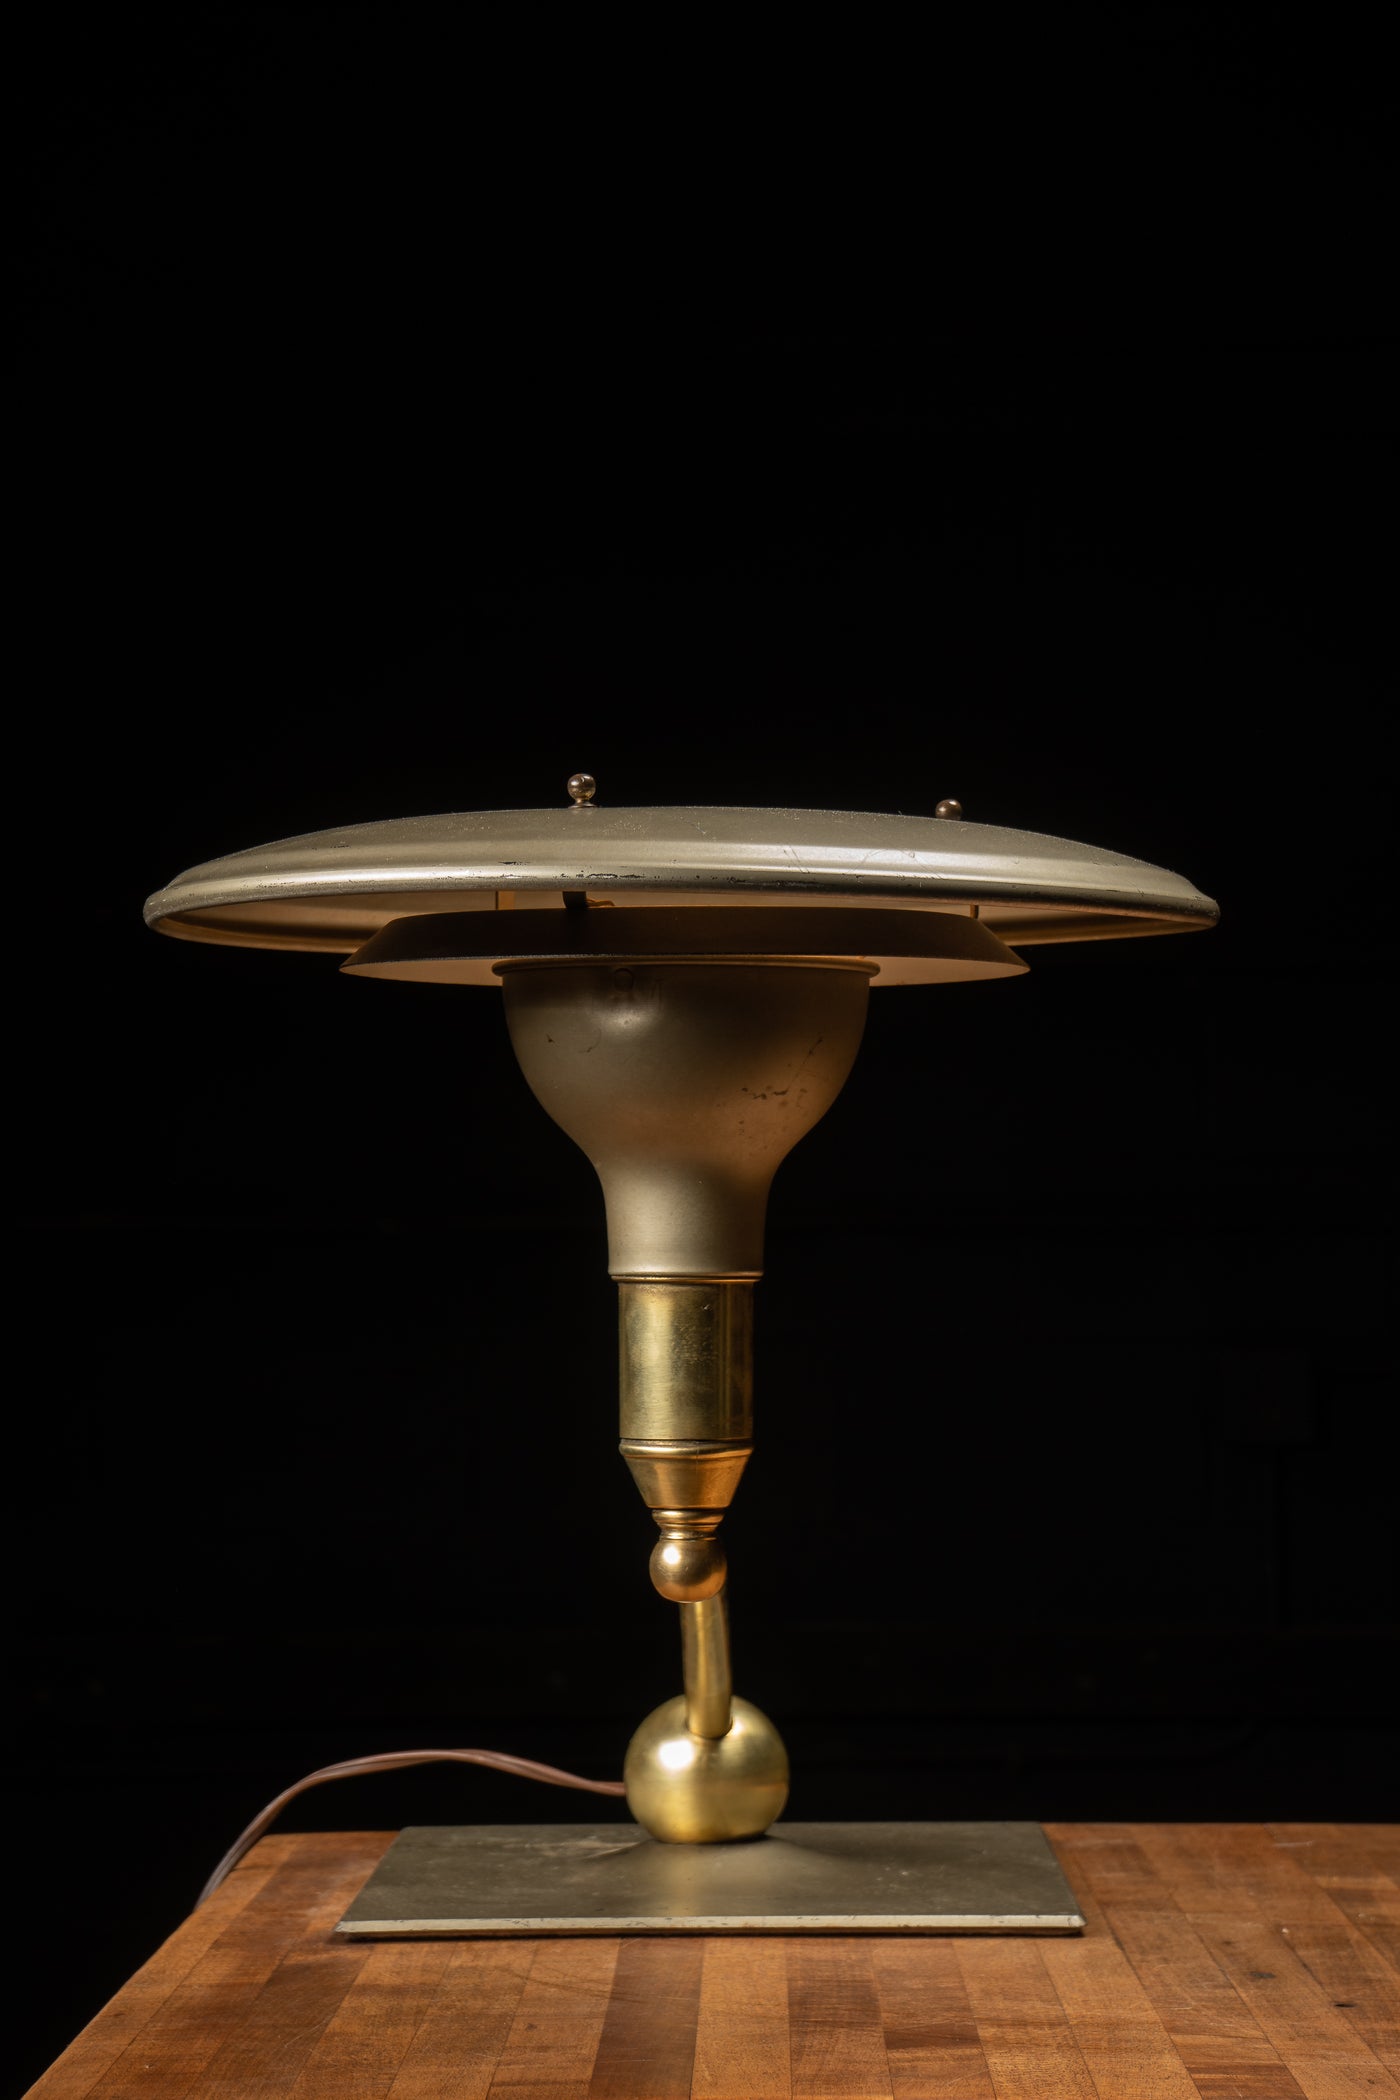 Vintage Saucer Lamp by MG Wheeler